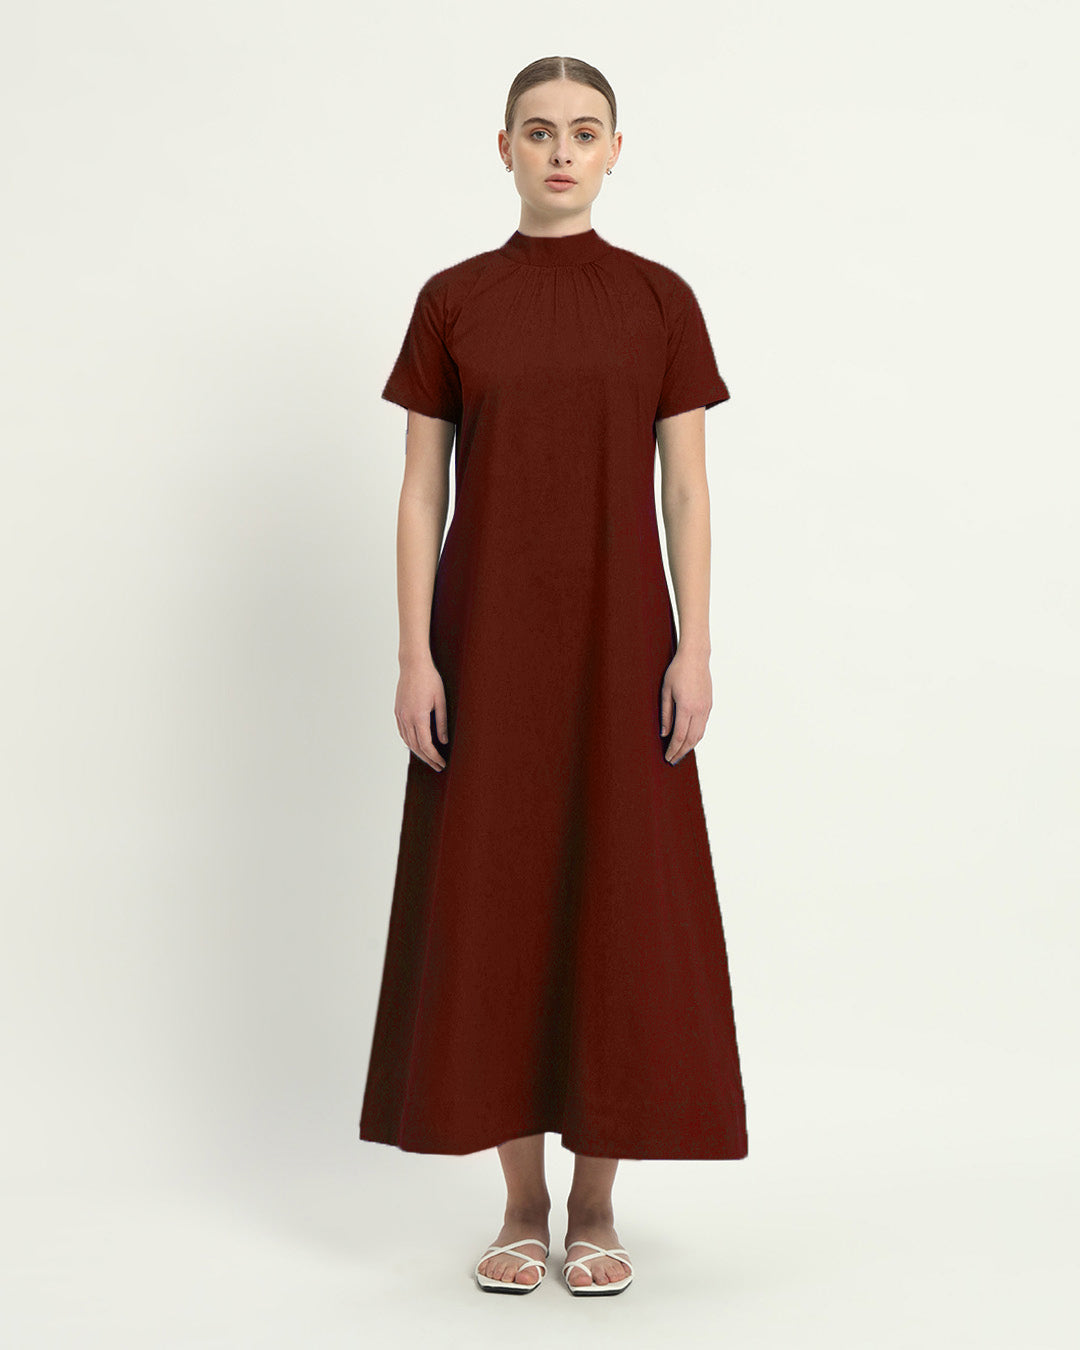 The Hermon Rouge Cotton Dress